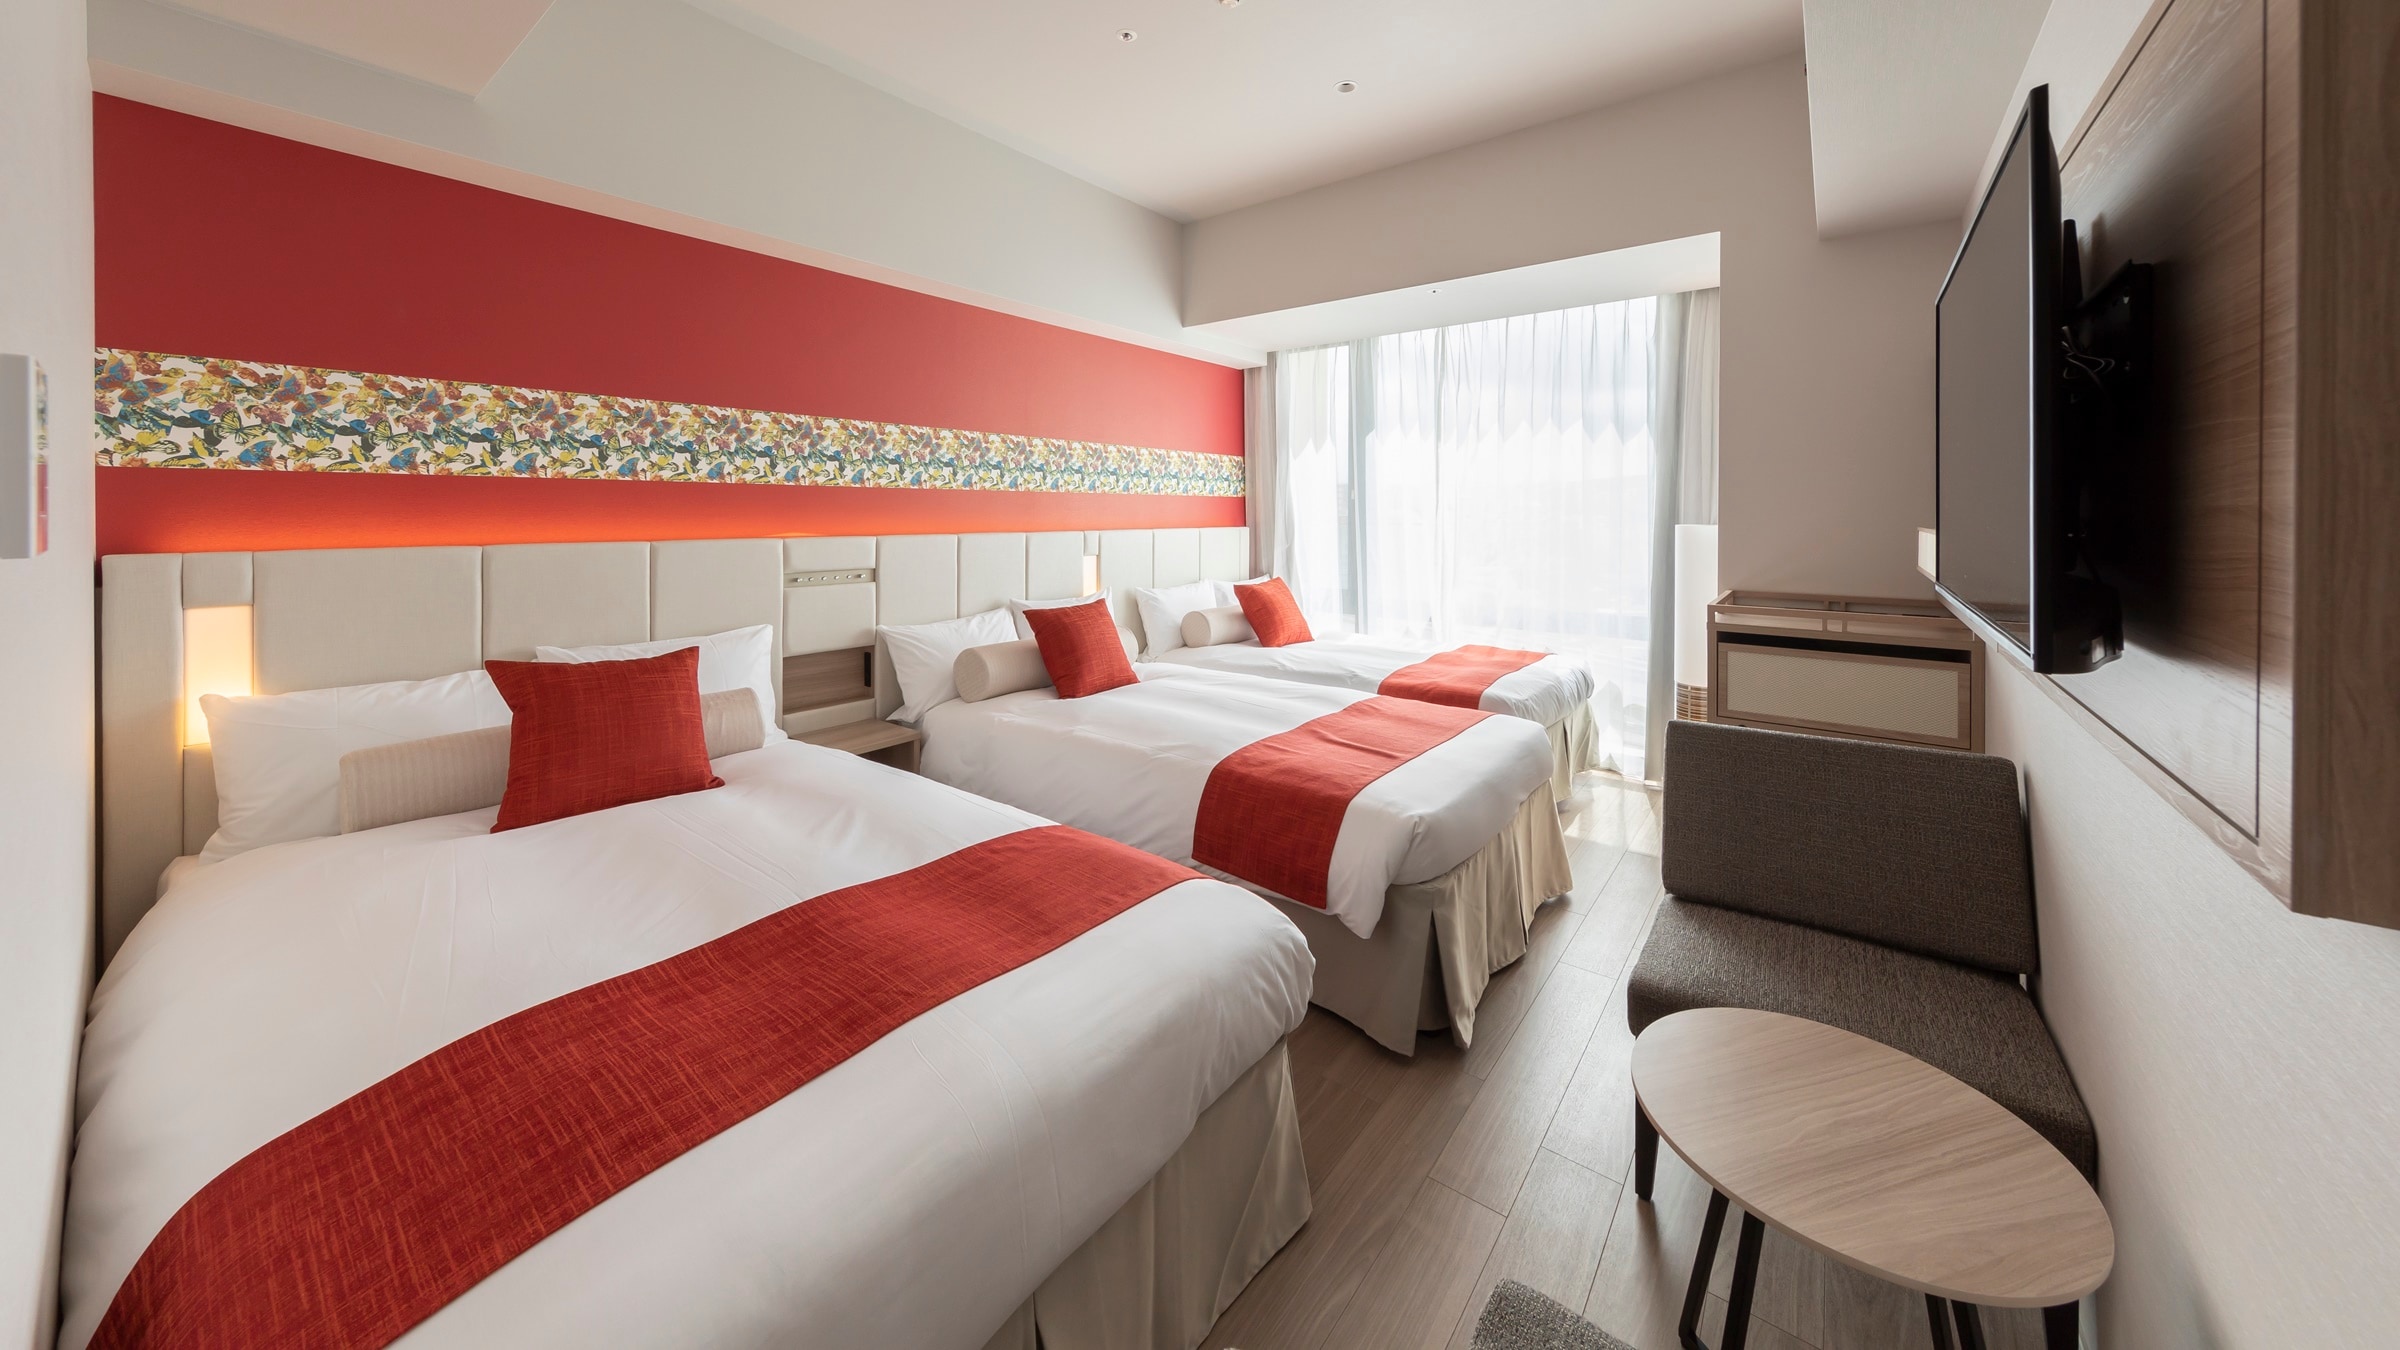 [Standard Twin + Extra Bed] The spacious space that enhances the resort mood is ideal for various scenes.